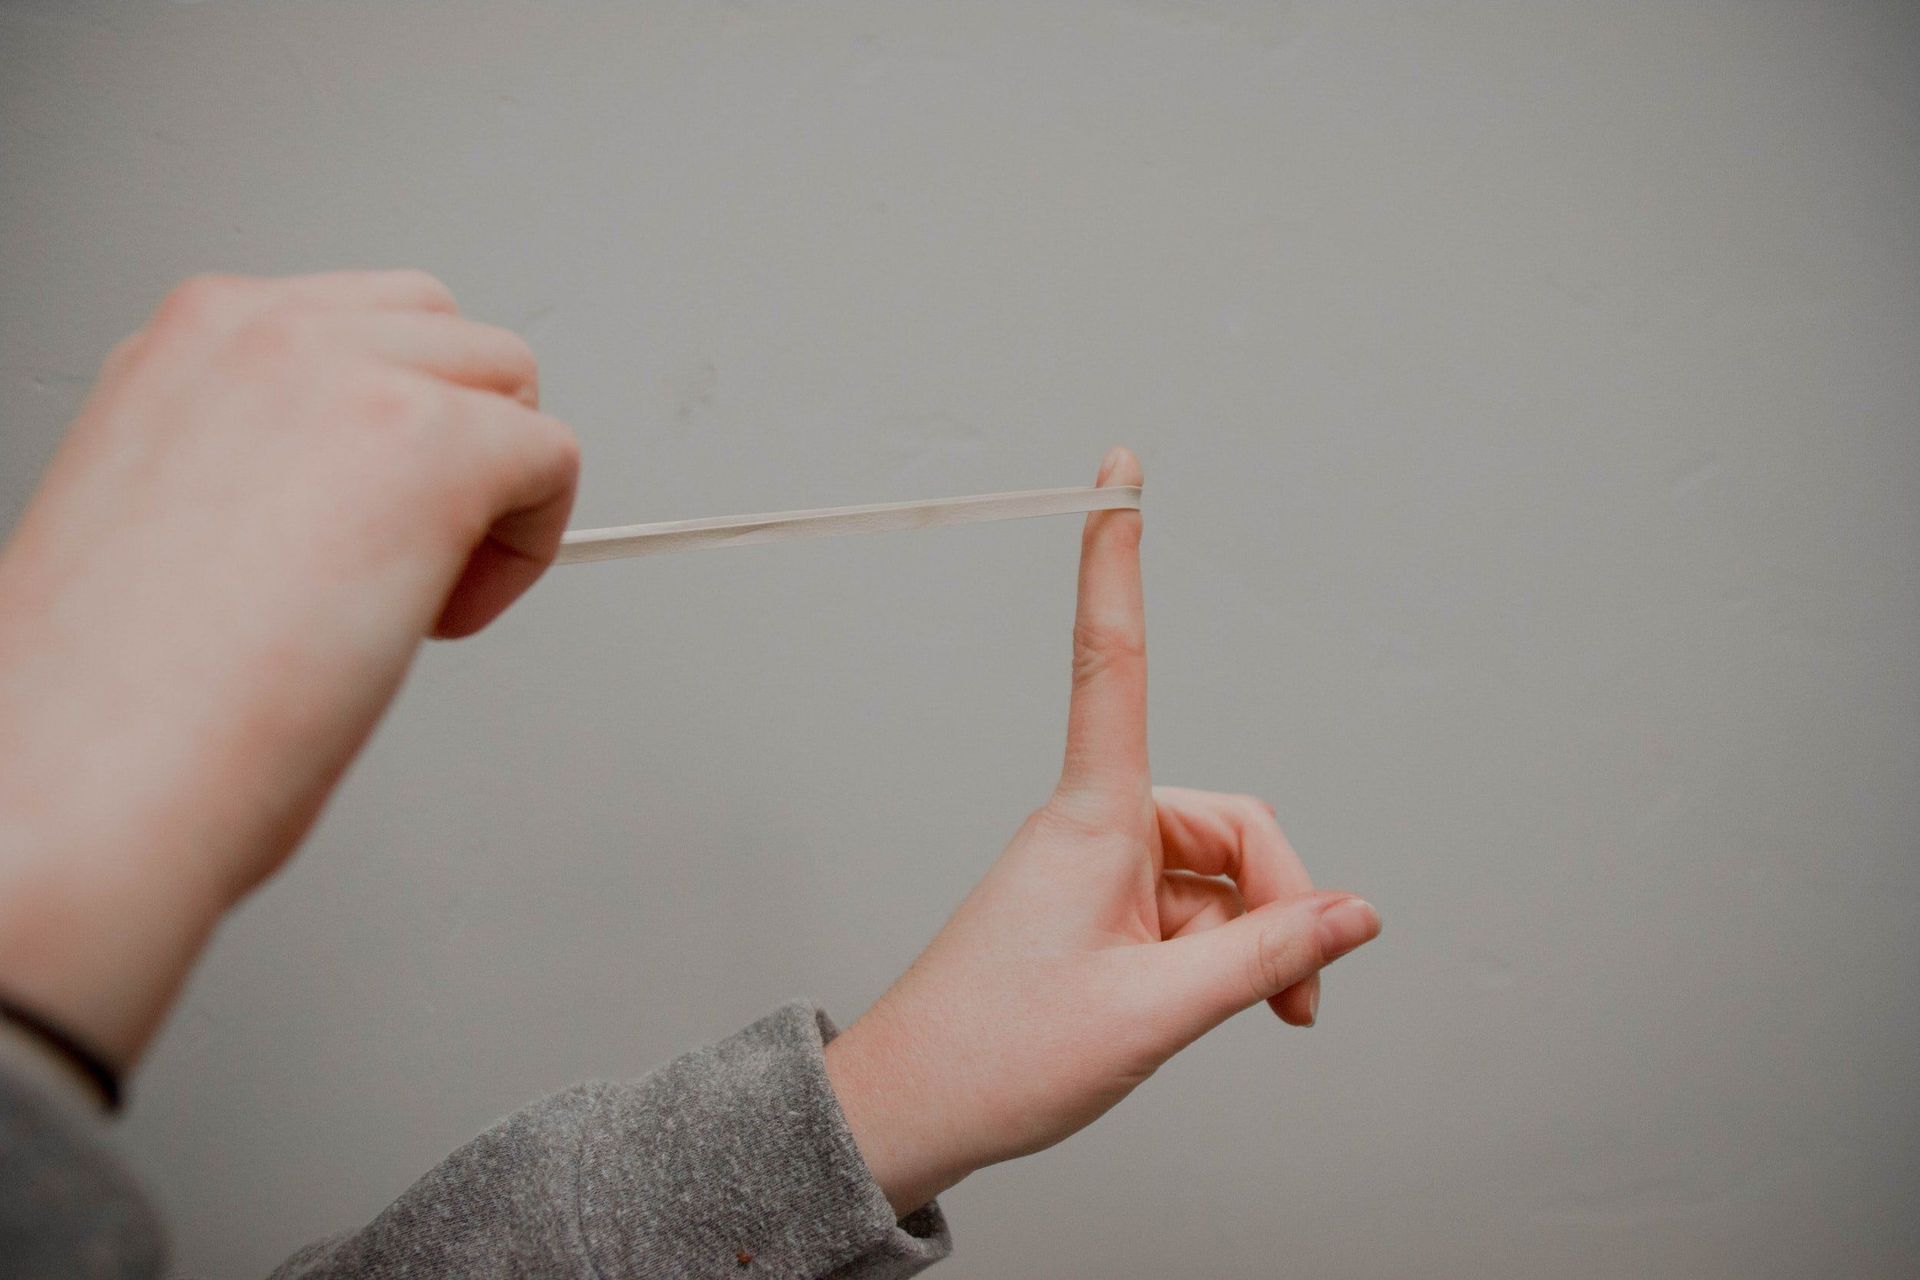 A person is holding a piece of string between their fingers.